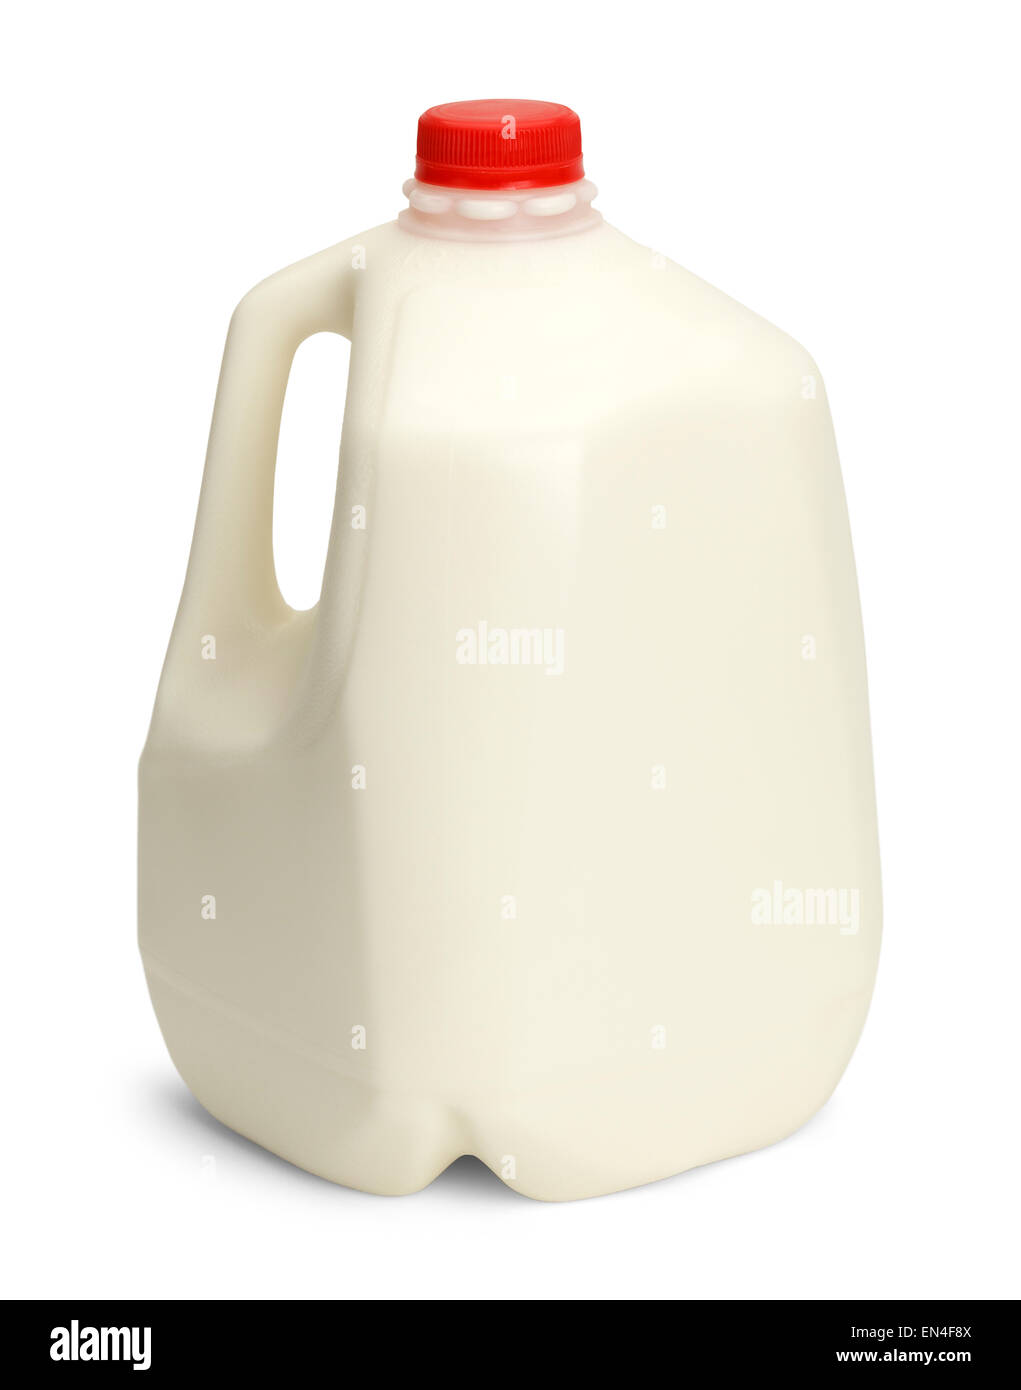 https://c8.alamy.com/comp/EN4F8X/gallon-of-whole-milk-with-red-plastic-cap-isolated-on-white-background-EN4F8X.jpg